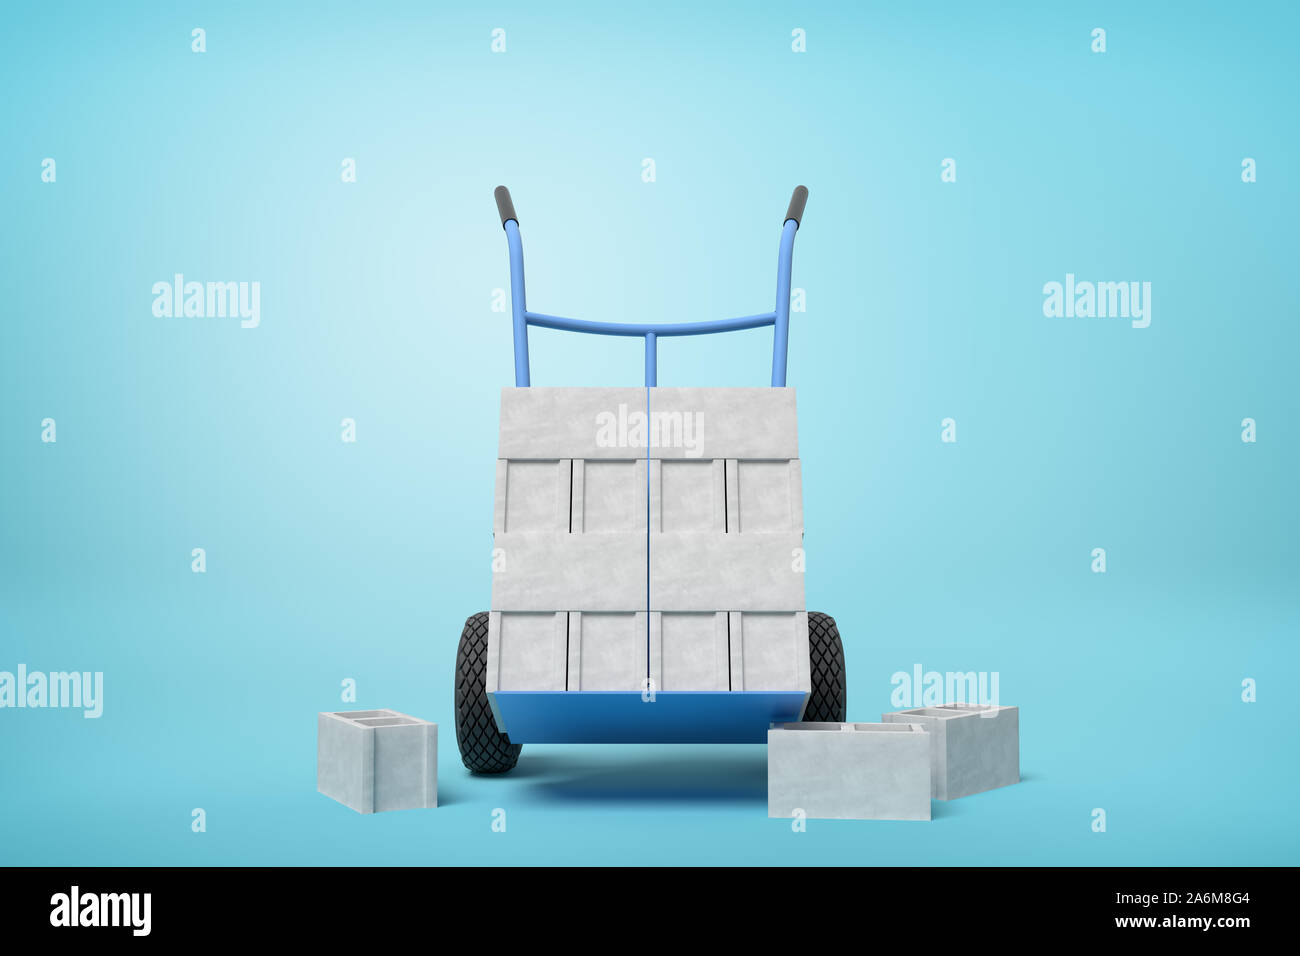 3d rendering of stack of grey hollow bricks on blue hand truck with several bricks lying on ground on light-blue background. Material handling. Buildi Stock Photo